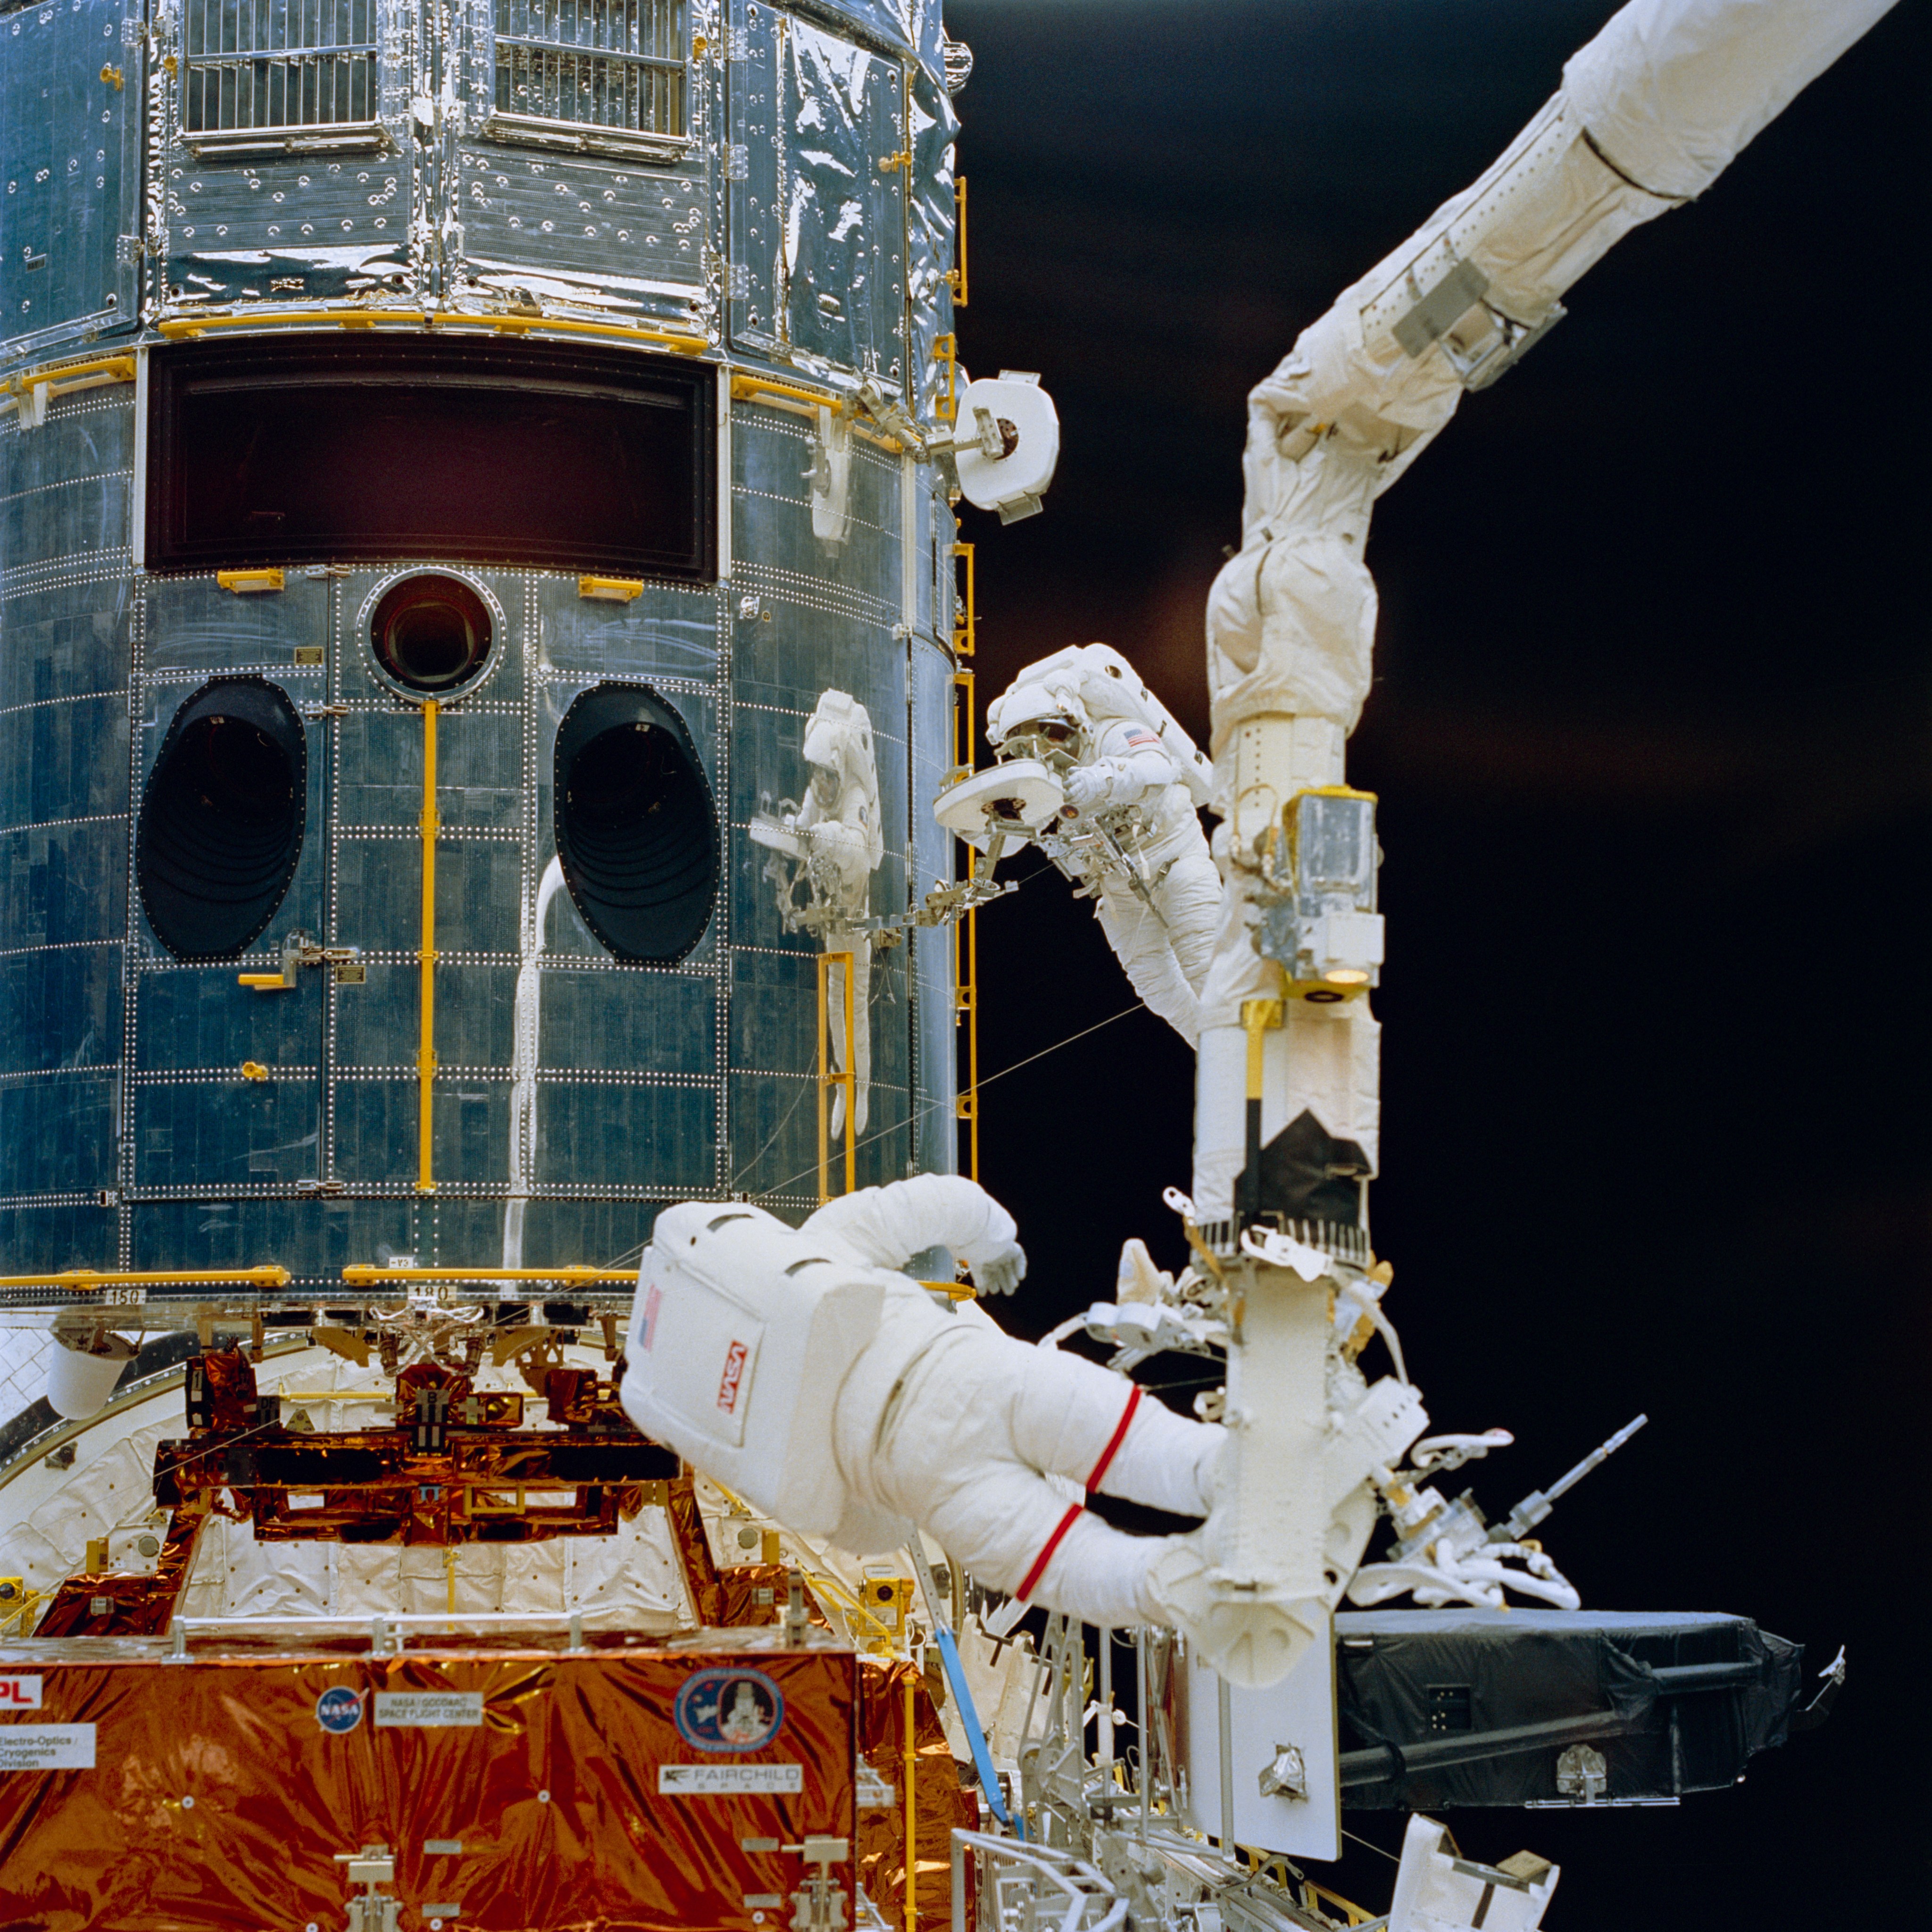 An astronaut on the robotic arm and an astronaut tethered to Hubble service the telescope.